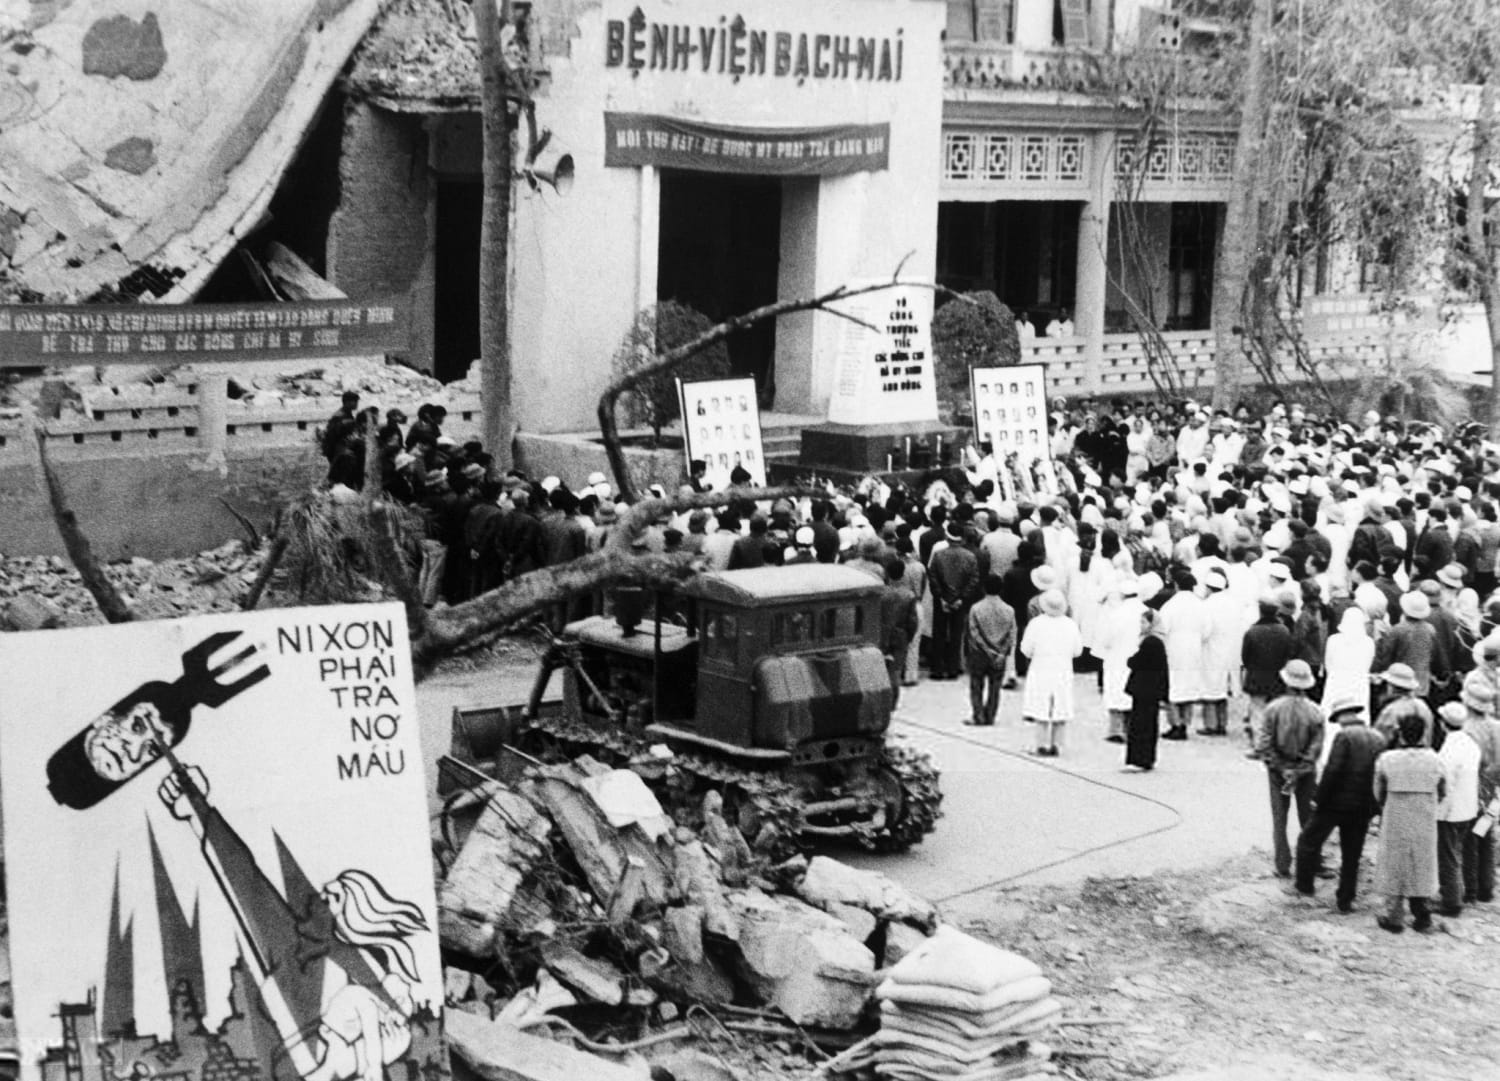 Jan 09 1973, Bach-Mai Hospital, Hanoi, North Vietnam - Funeral services are held at Bach-Mai Hospital in Hanoi, North Vietnam for the hospital staff killed by US B-52 bombing runs on Dec 19-20 1972. An anti-Nixon poster is displayed near the wreckage.